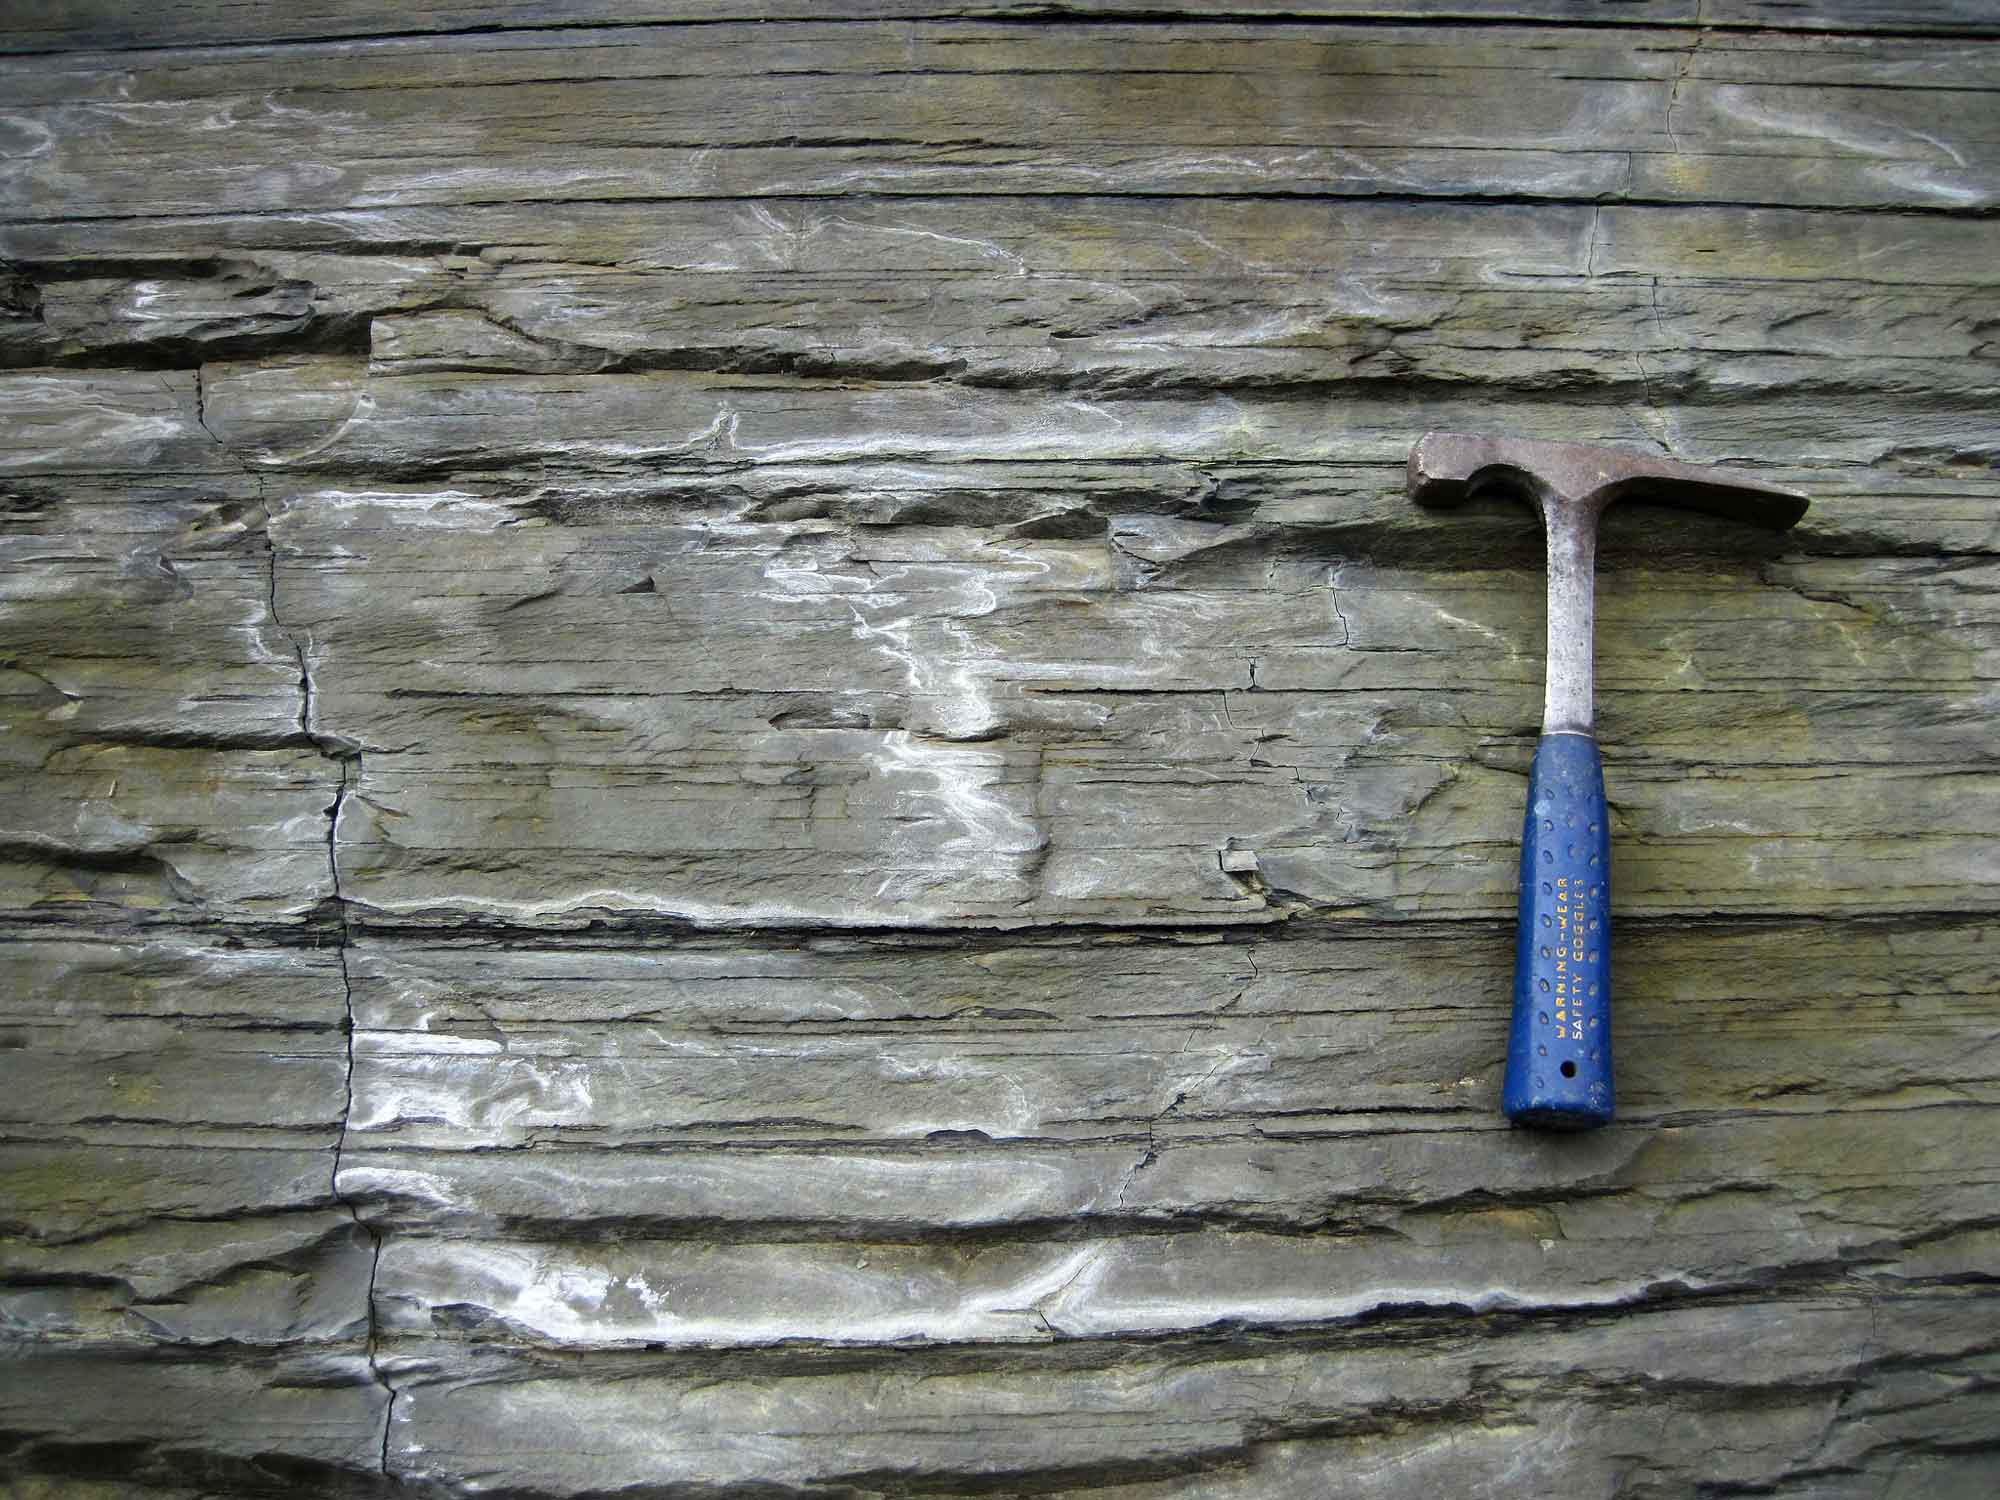 Photograph showing a close-up view of Devonian Shales from Kentucky.